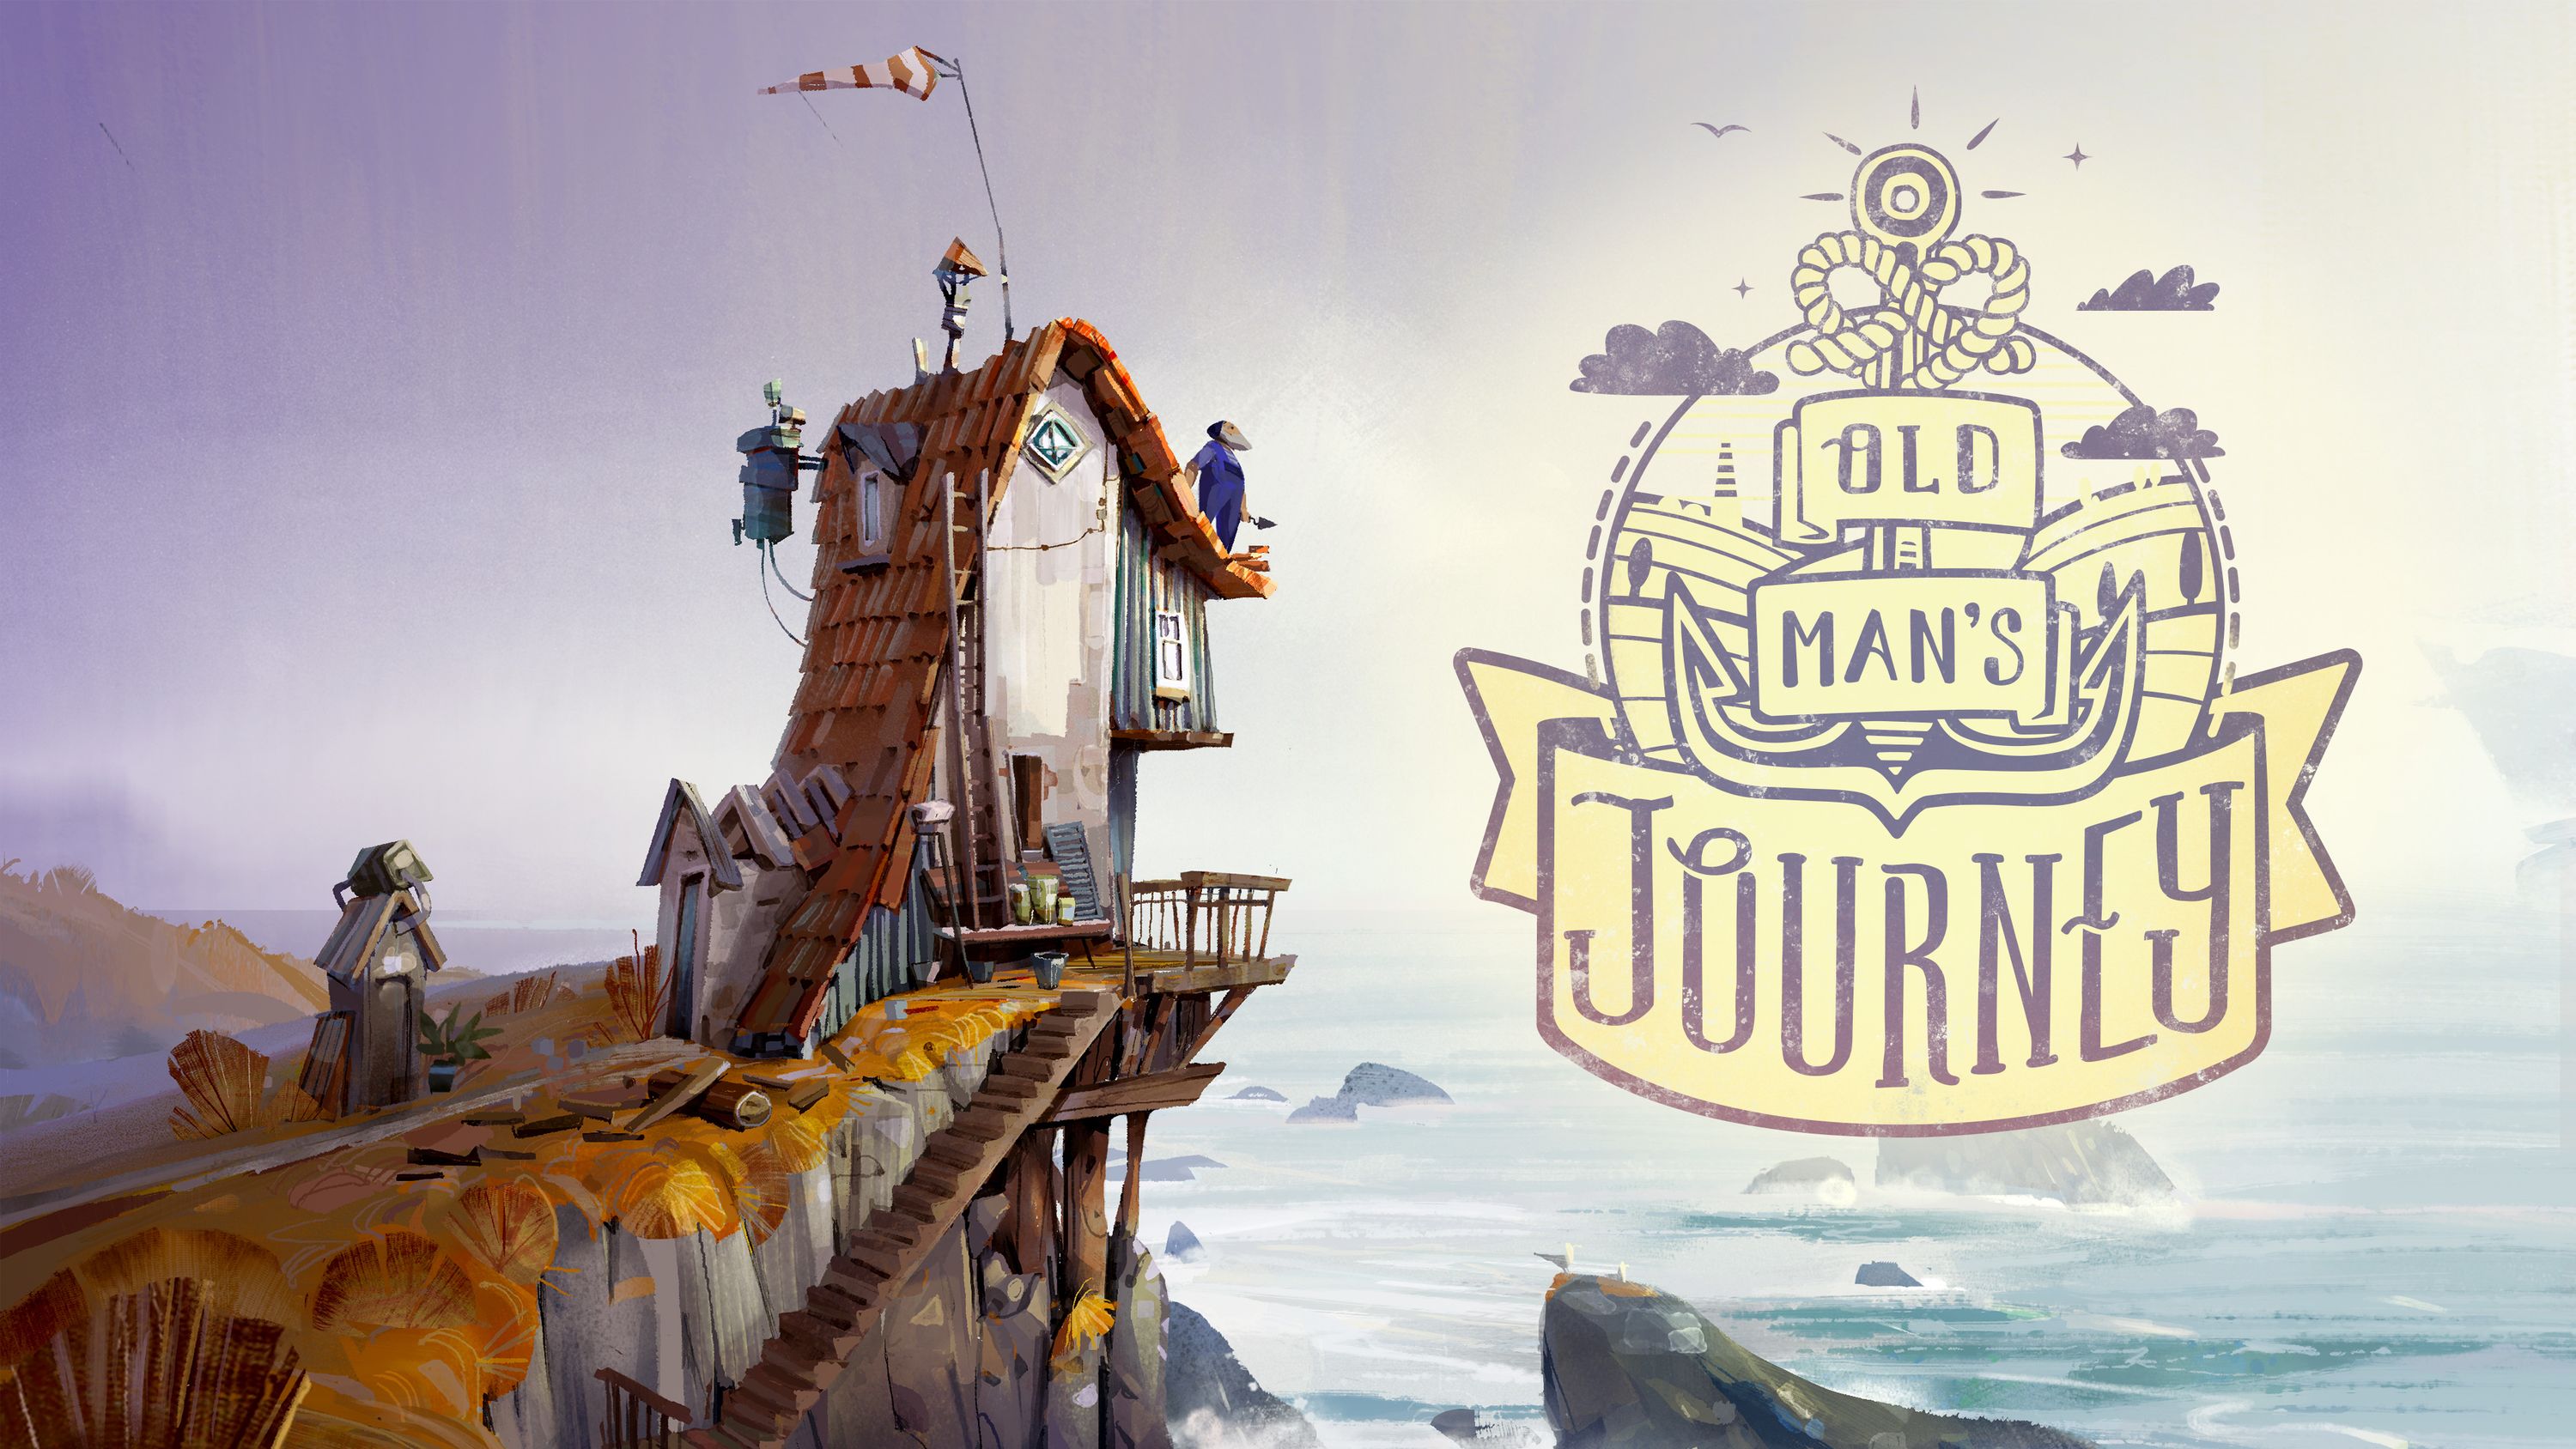 Artwork from the game ‘Old Man’s Journey’